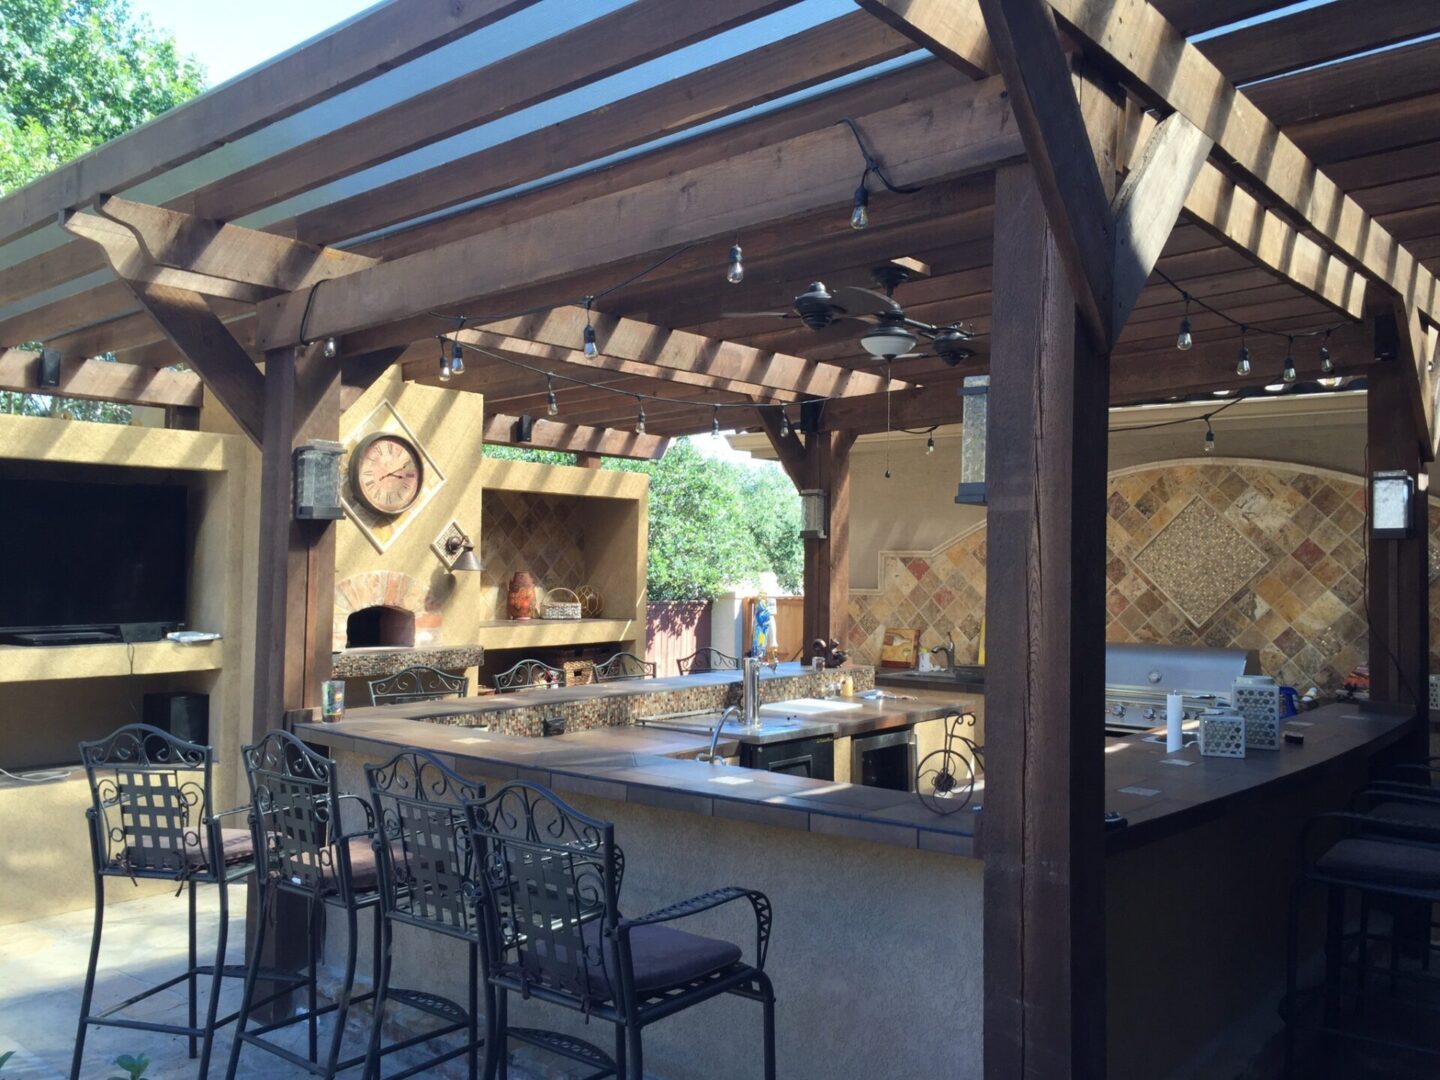 A patio with an outdoor kitchen and bar.